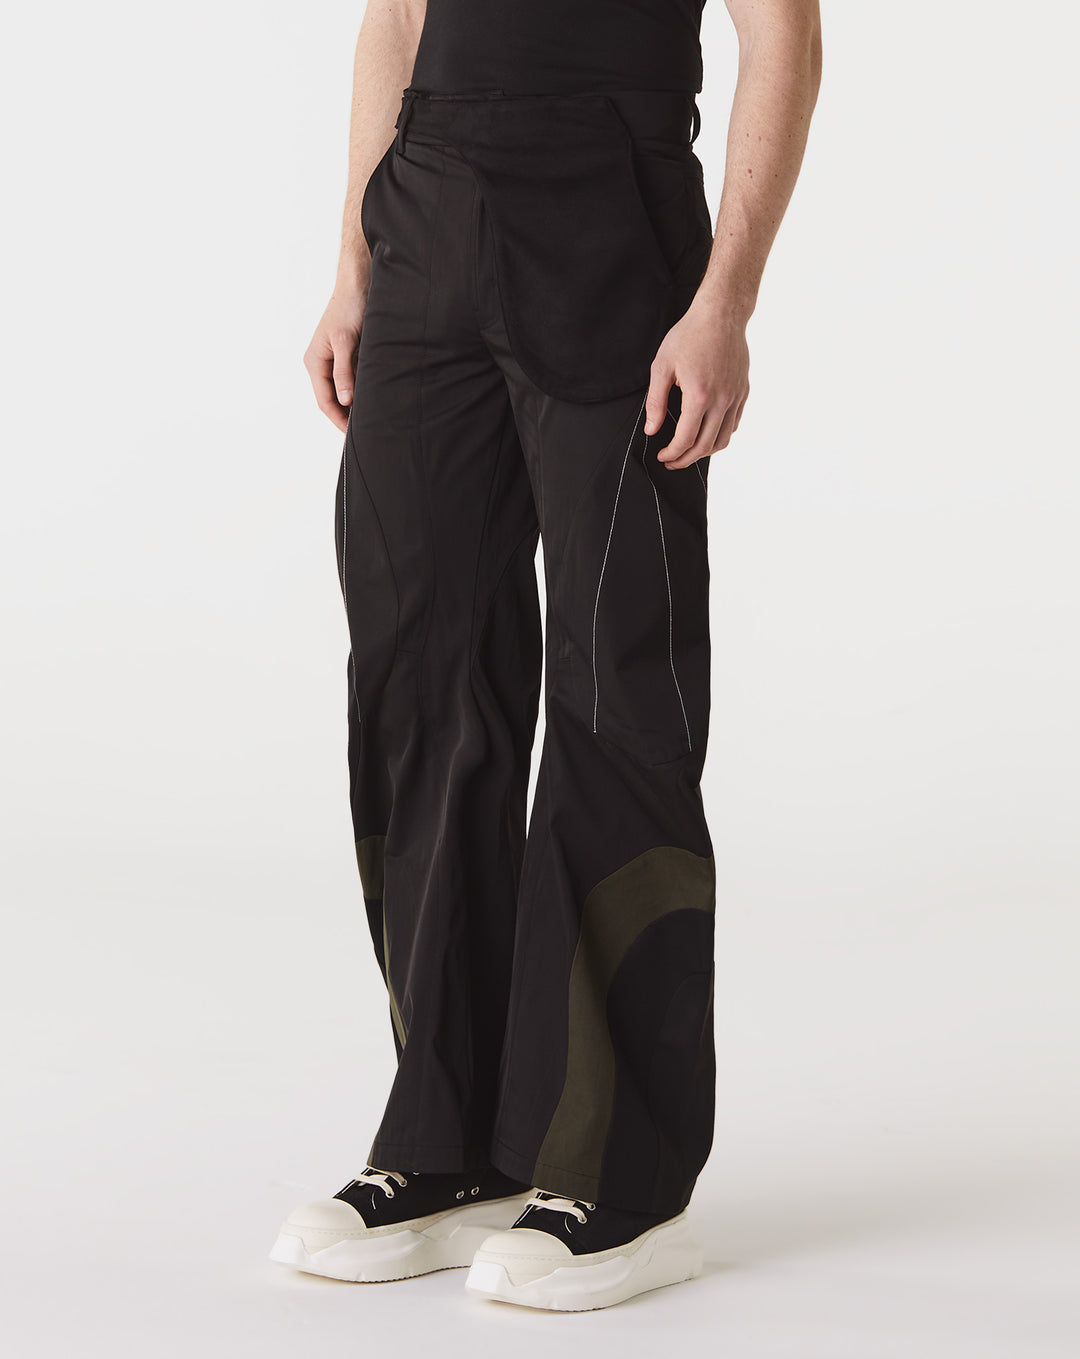 Articulated Waist Bag Trousers V1